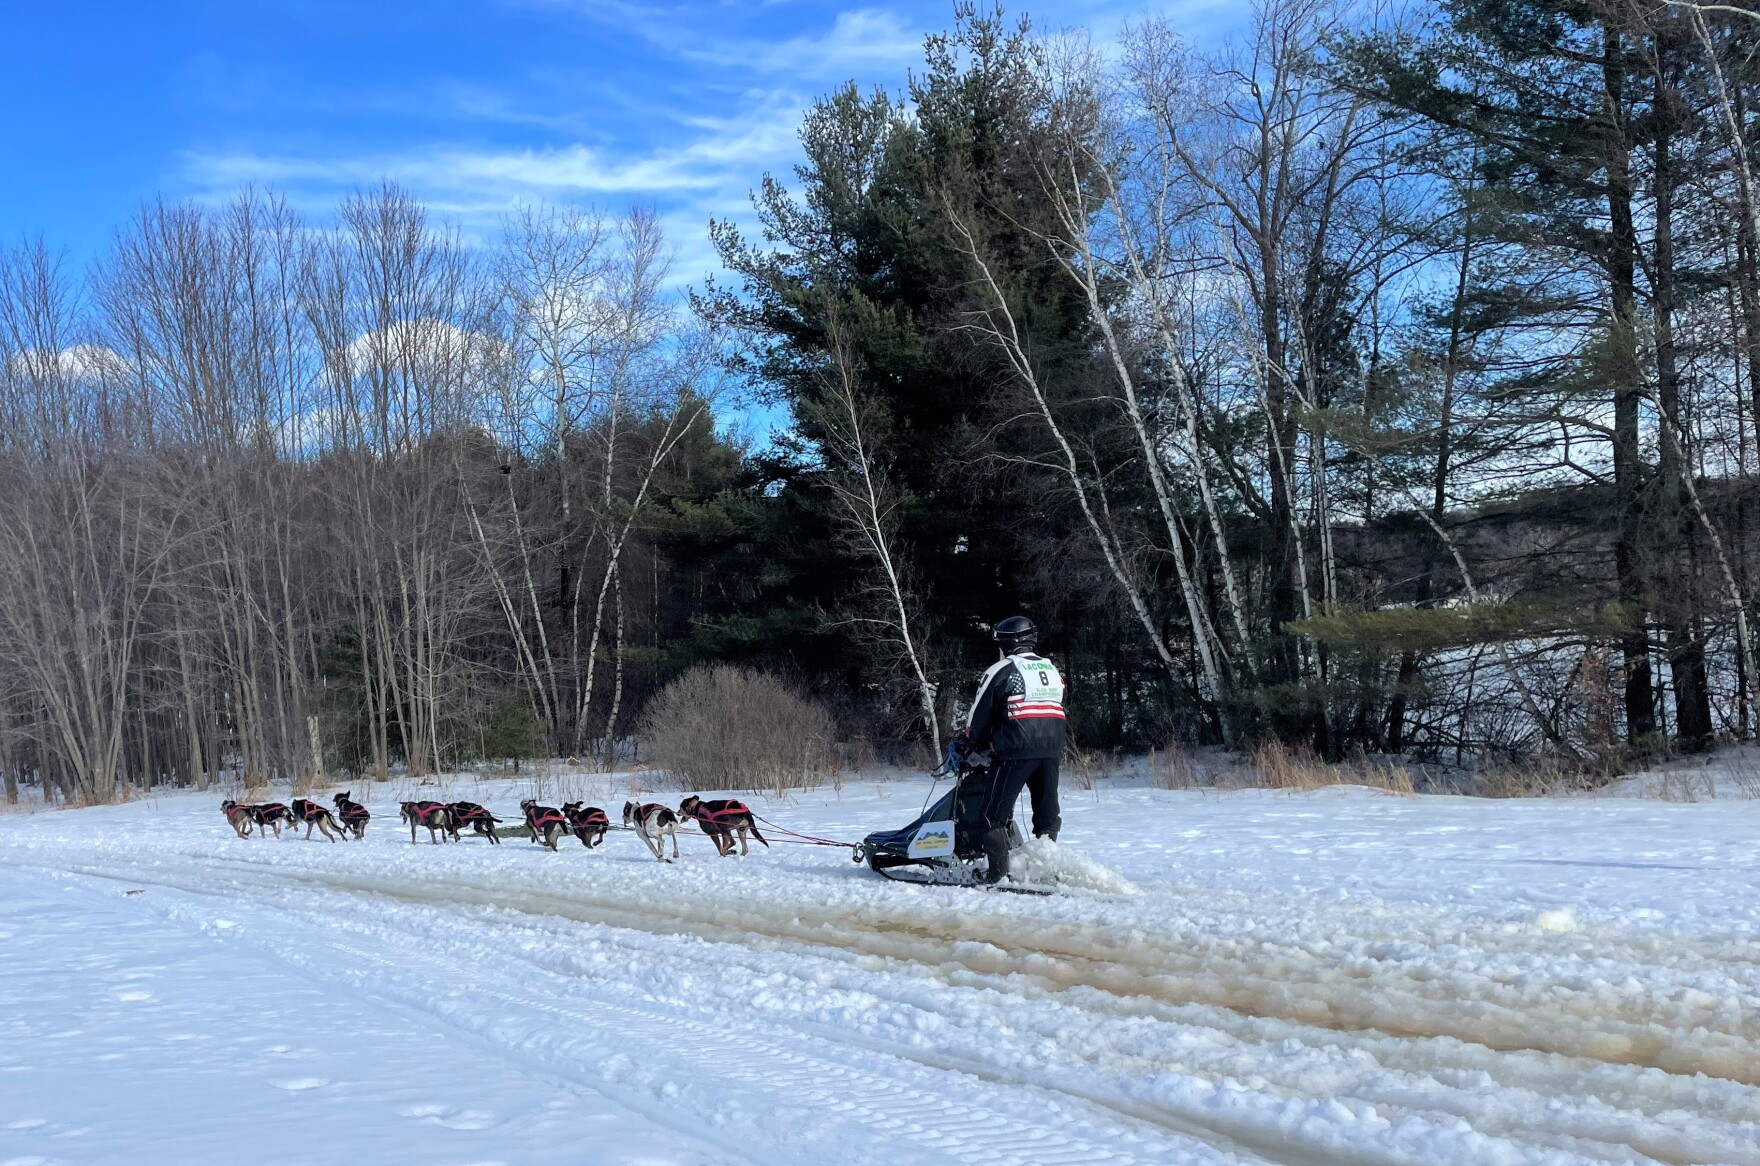 ten dogs pull a person on a sled in slushy snow